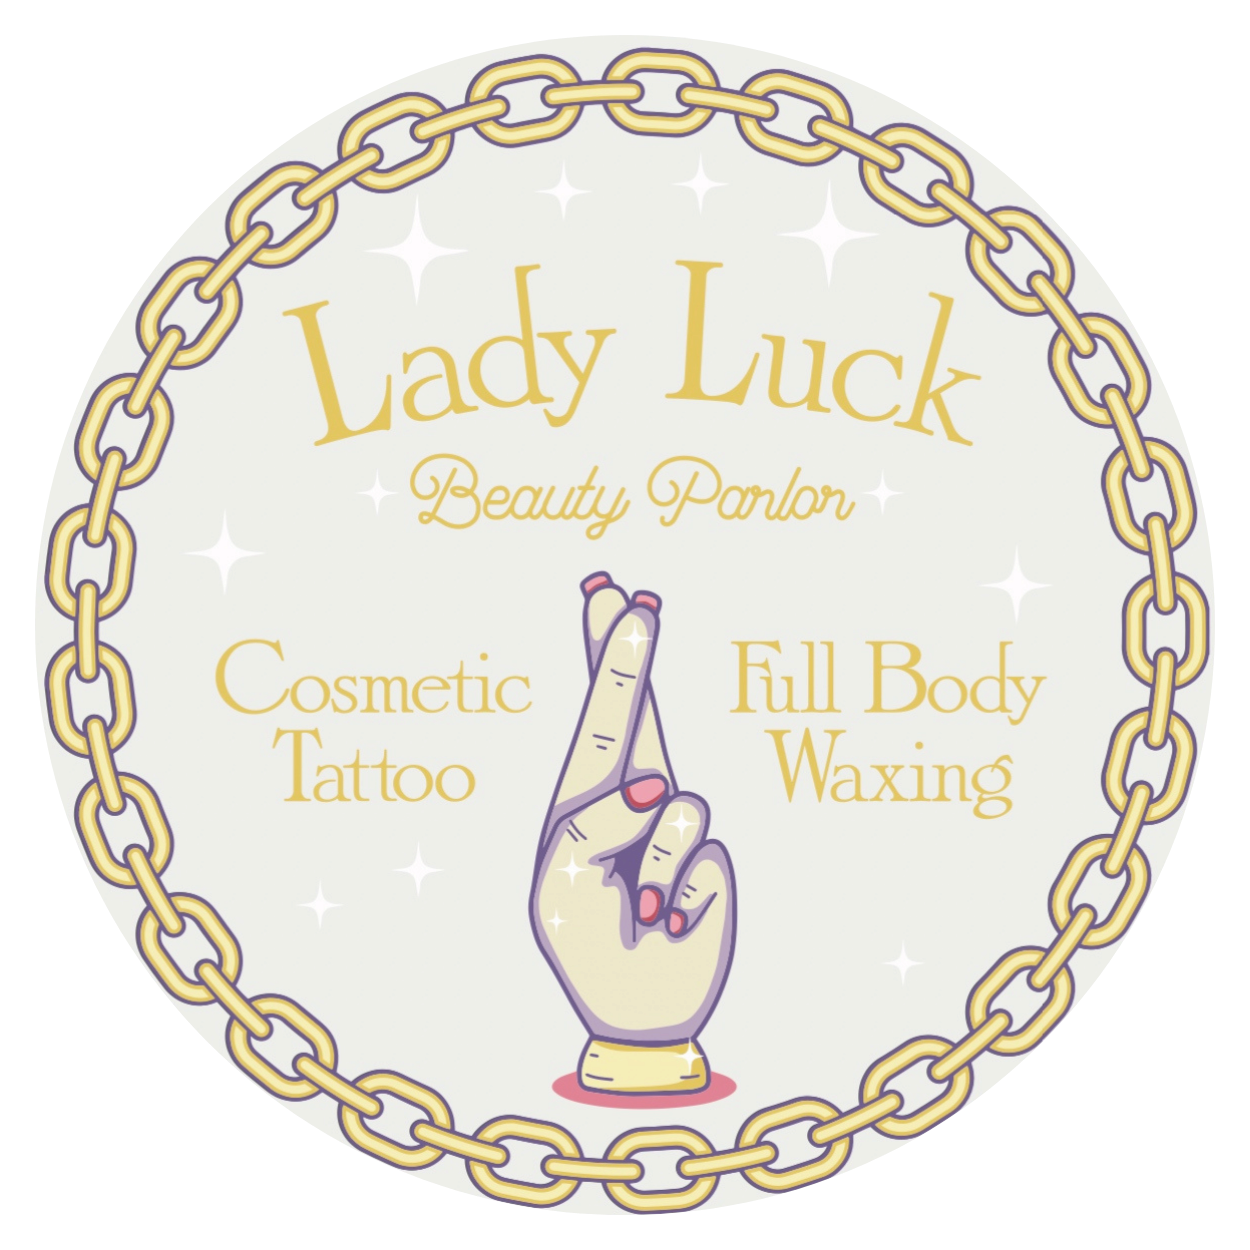 Lady Luck Beauty Parlor